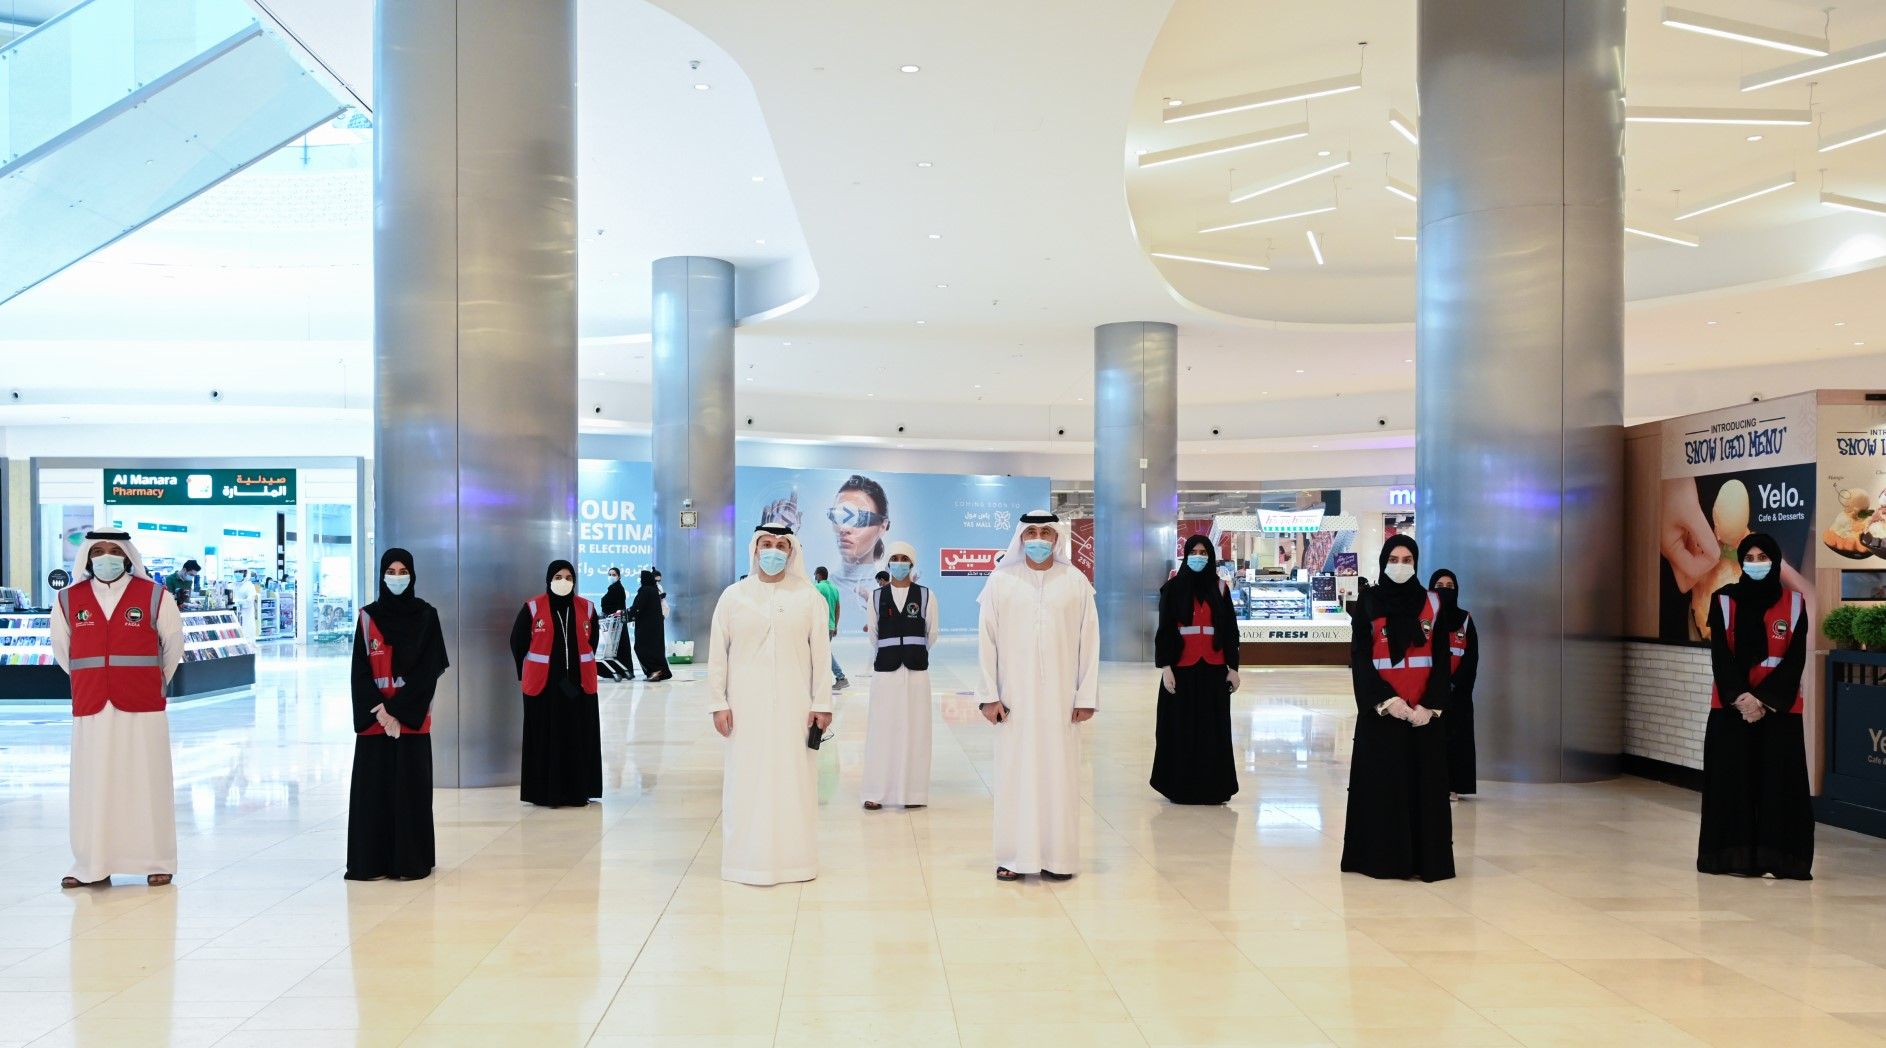 Abu Dhabi launches campaign to spread awareness about COVID among businesses